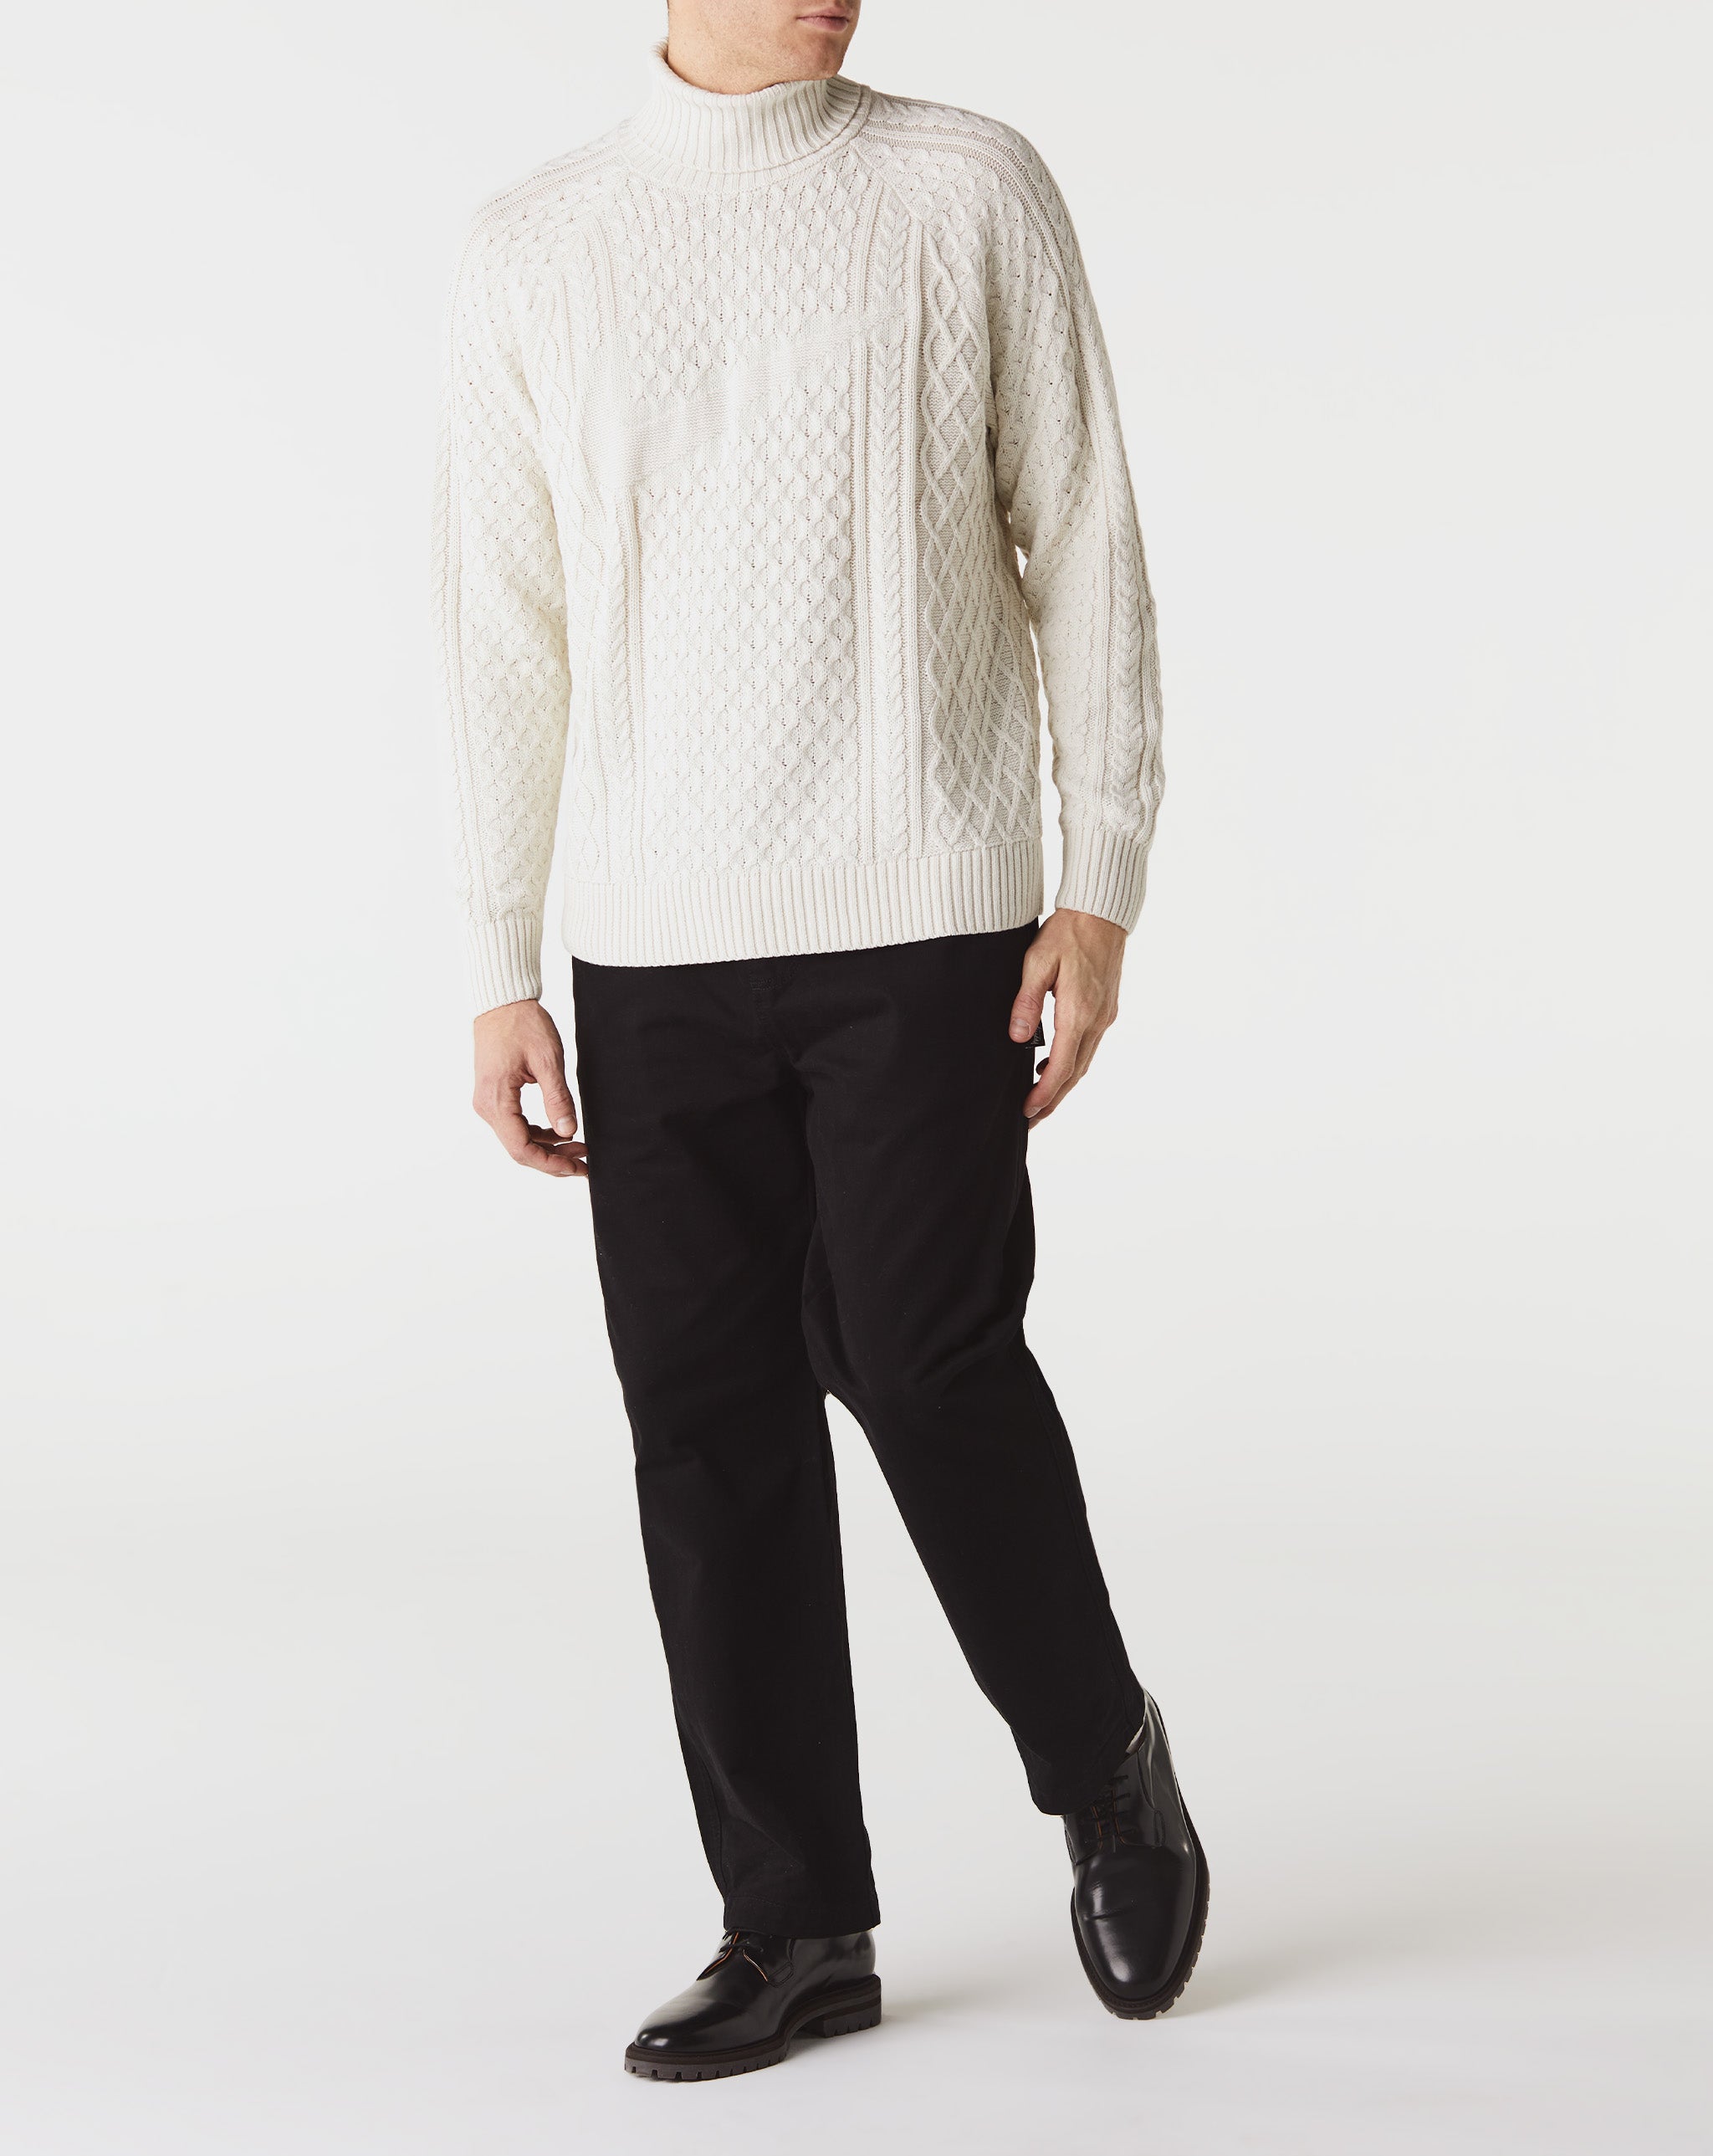 Nike Cable Knit Turtleneck - Rule of Next Apparel